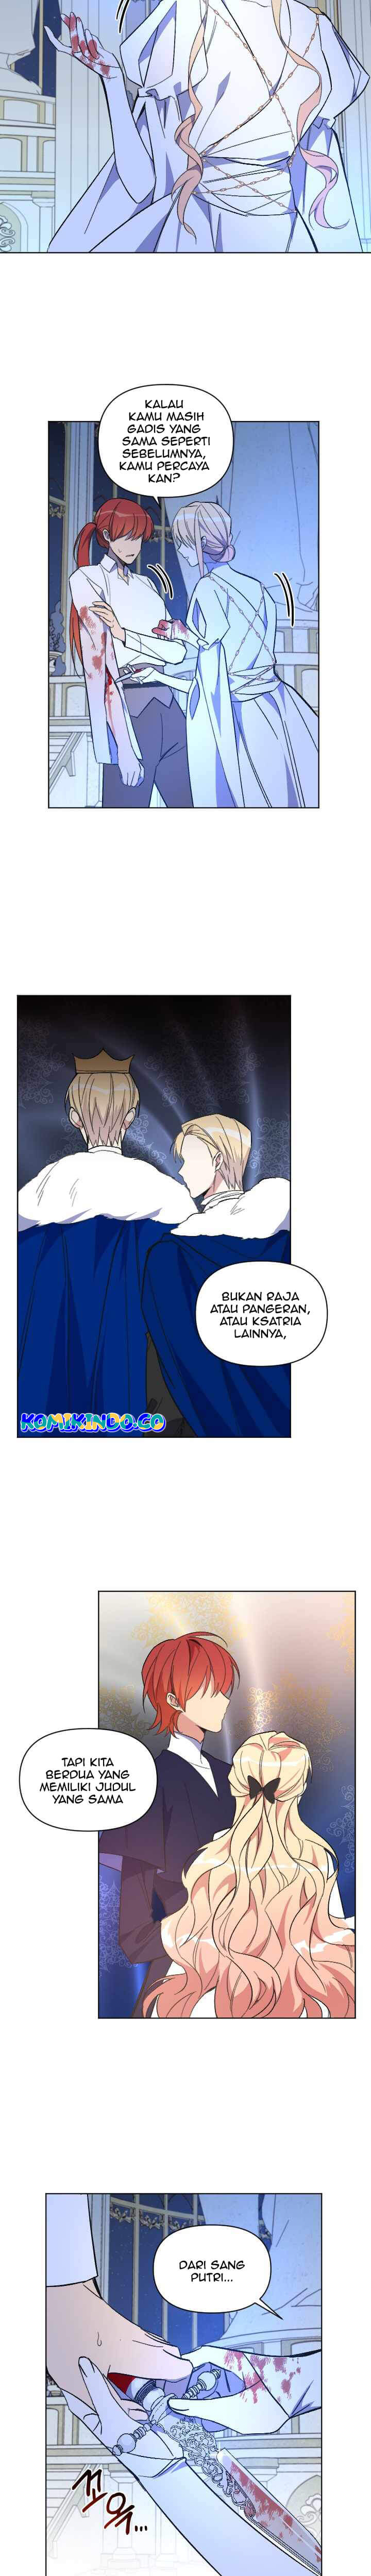 Asirhart Kingdom Aide Chapter 49